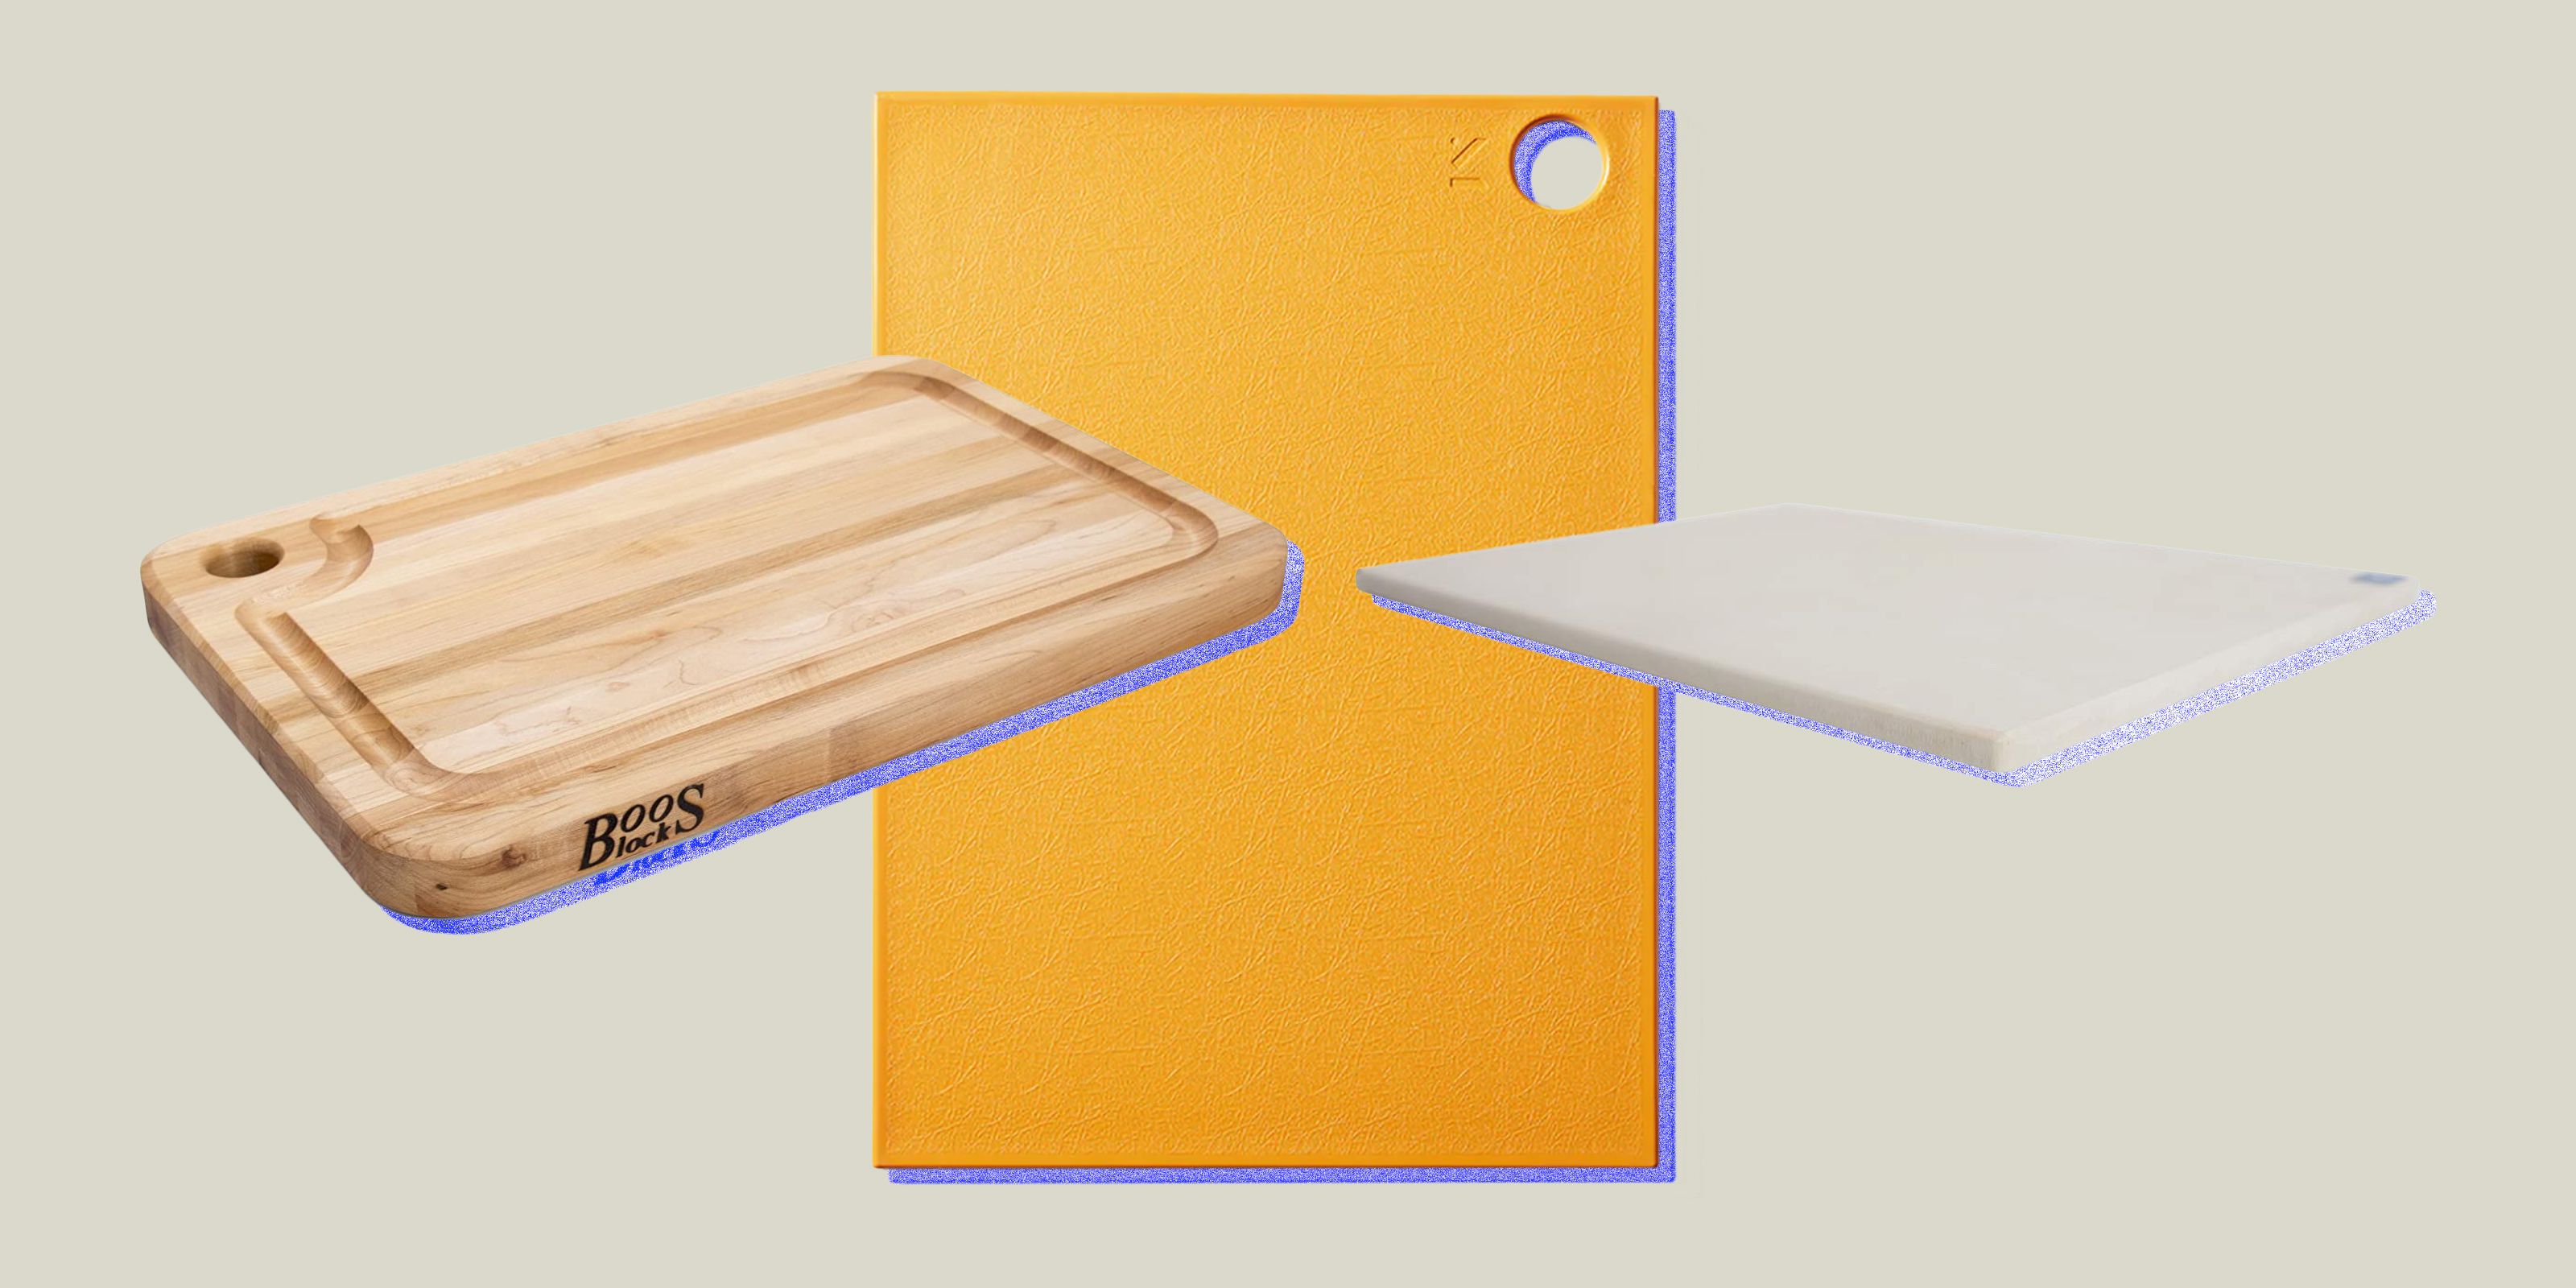 Cutting Boards: The Trendy Accessory We're All Putting on Display